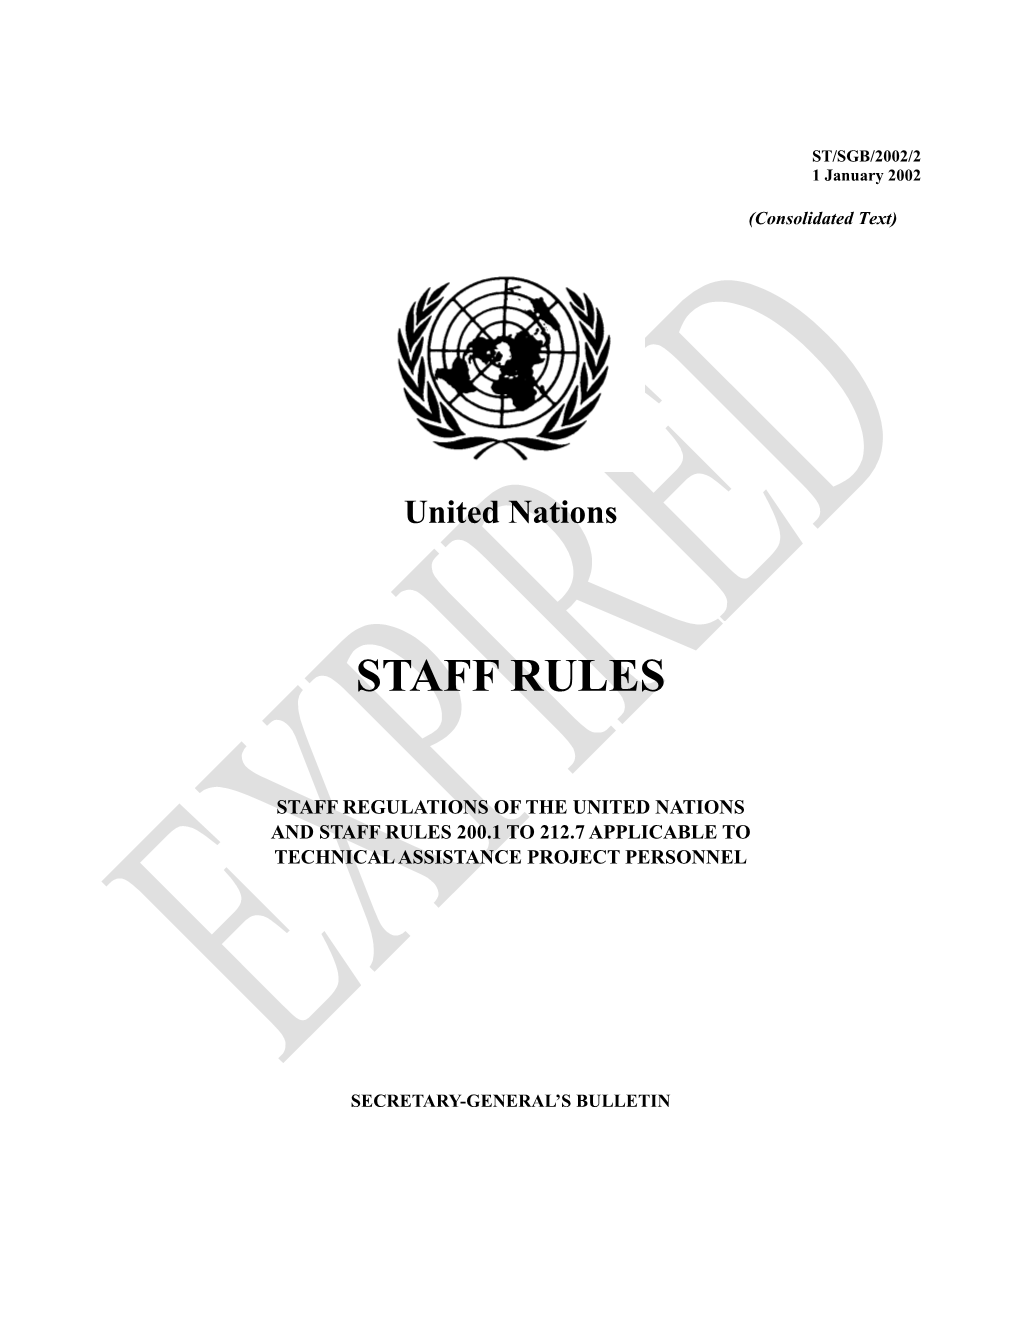 Staff Regulations of the United Nations